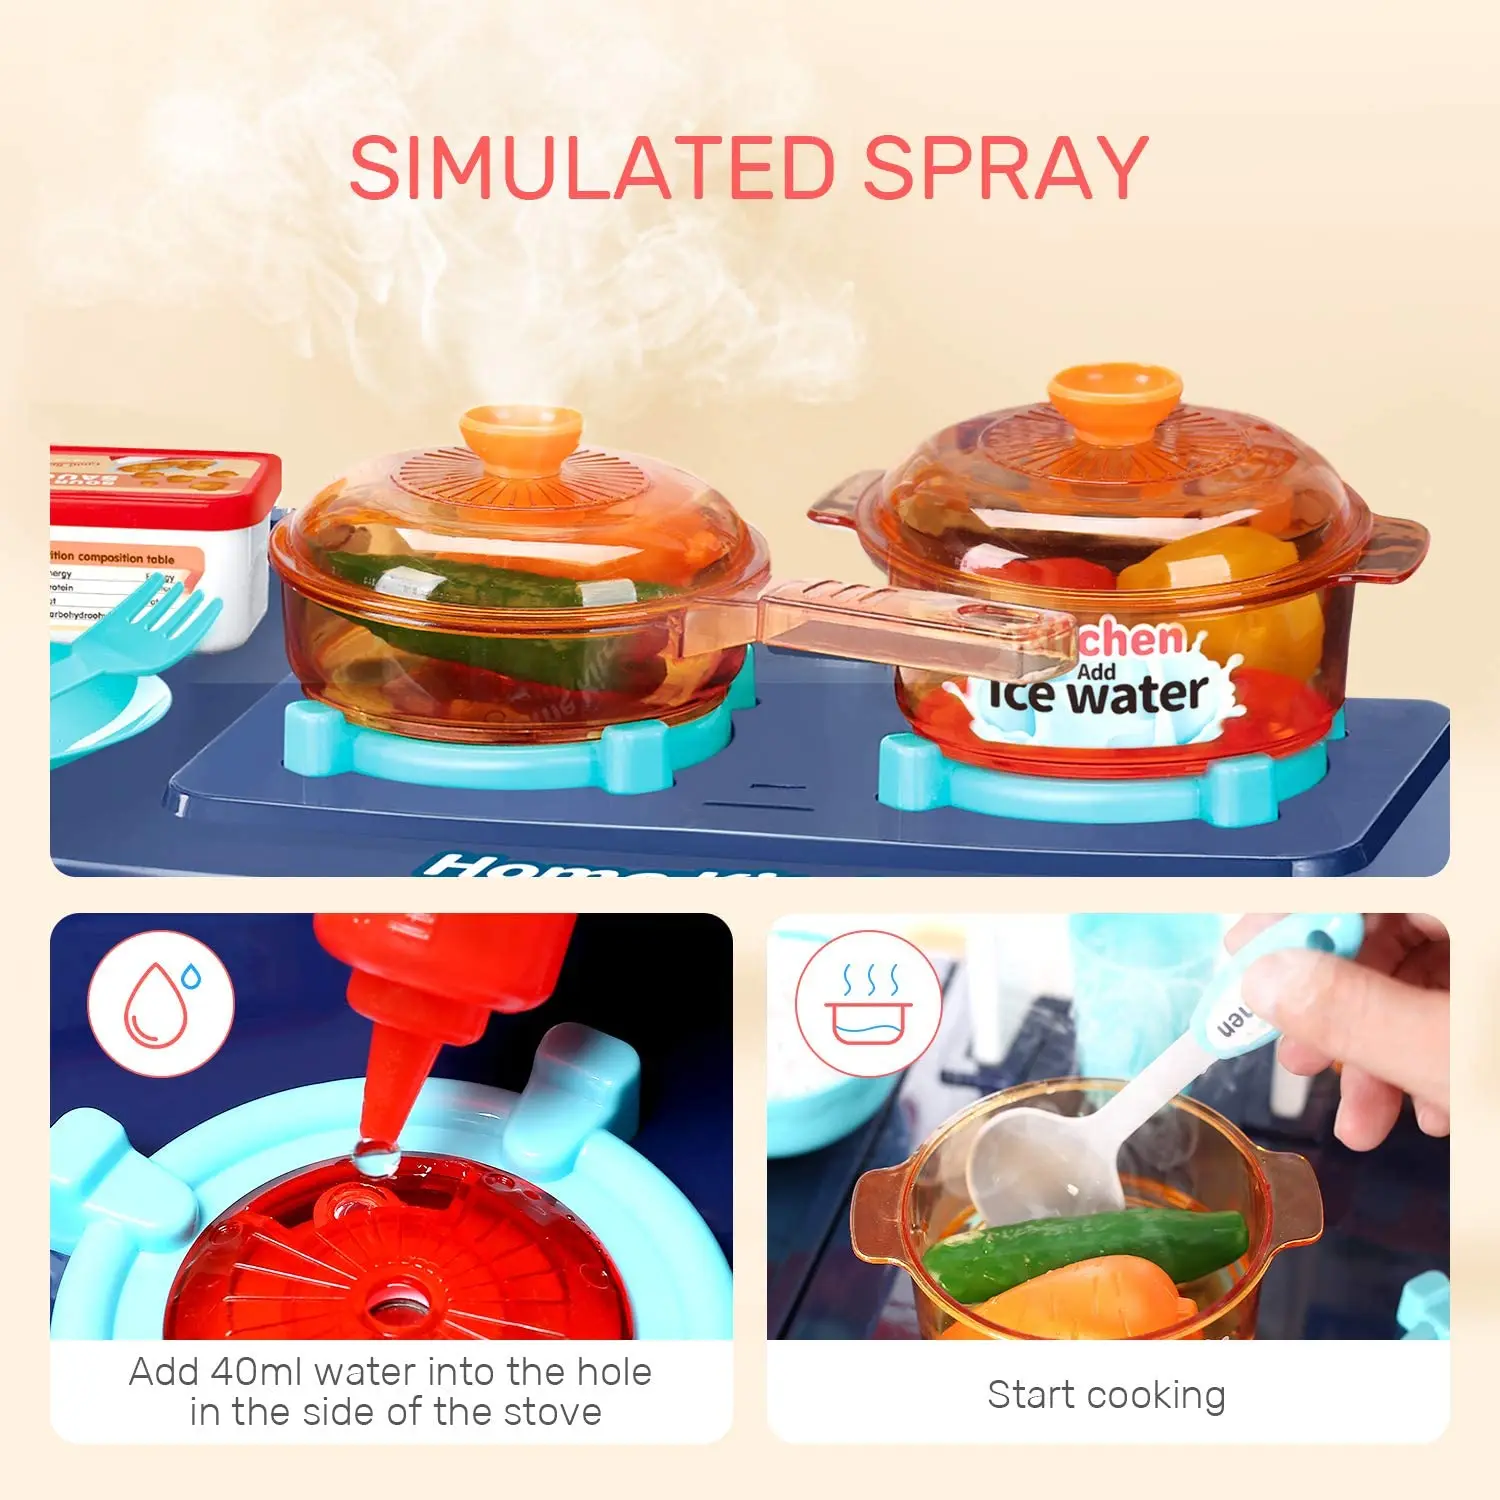 Running Water Little Kitchen Playset with Lights & Sounds Simulation of Spray 